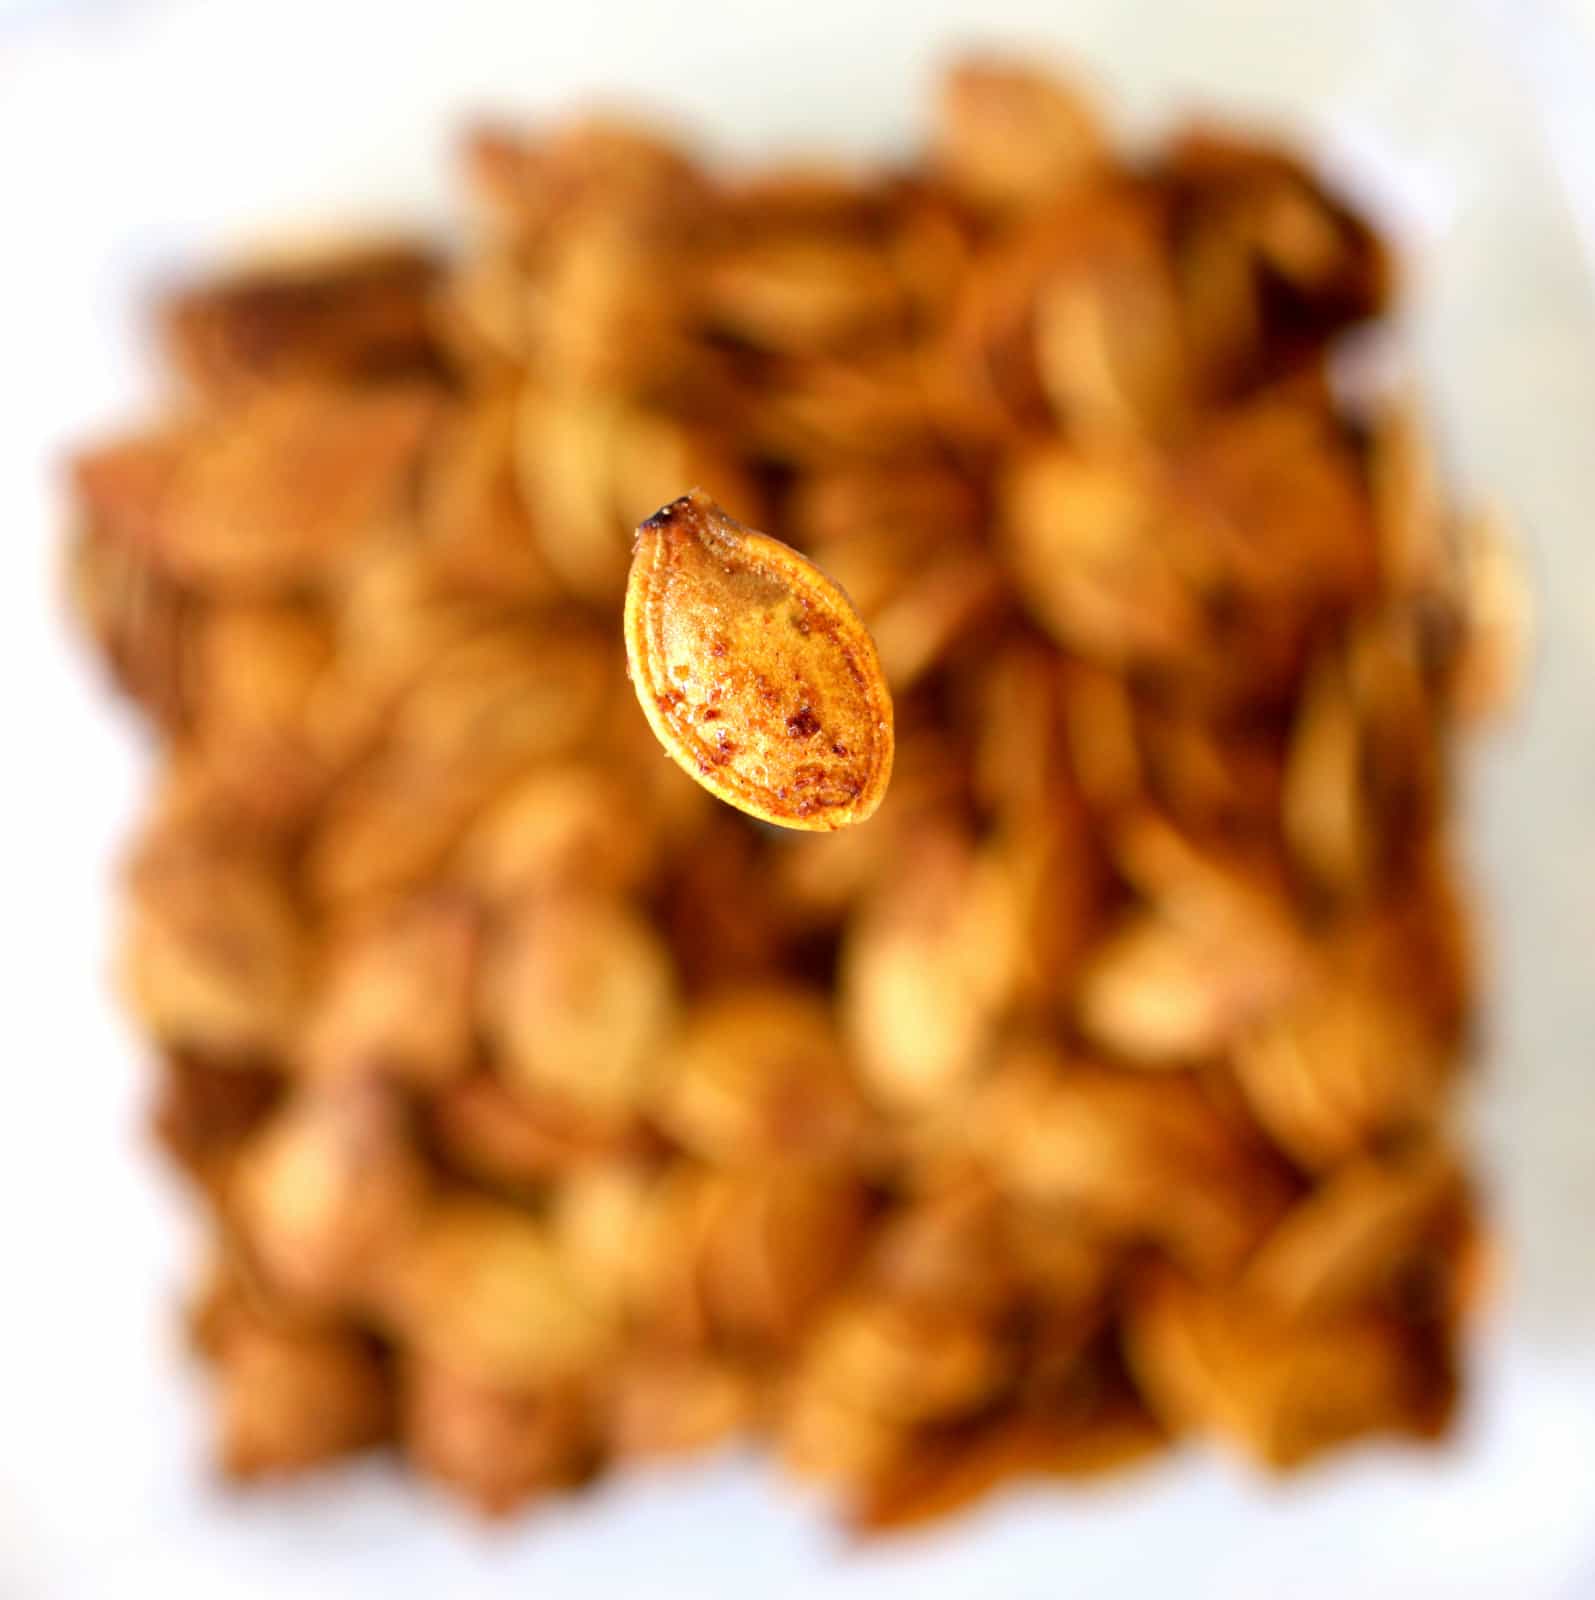 Roasted Pumpkin Seeds are easier than you think. If you've ever wanted to know how to roast pumpkin seeds, I'll teach you. This roasted pumpkin seeds recipe are crispy and full of seasoning! #pumpkin #seeds the-girl-who-ate-everything.com